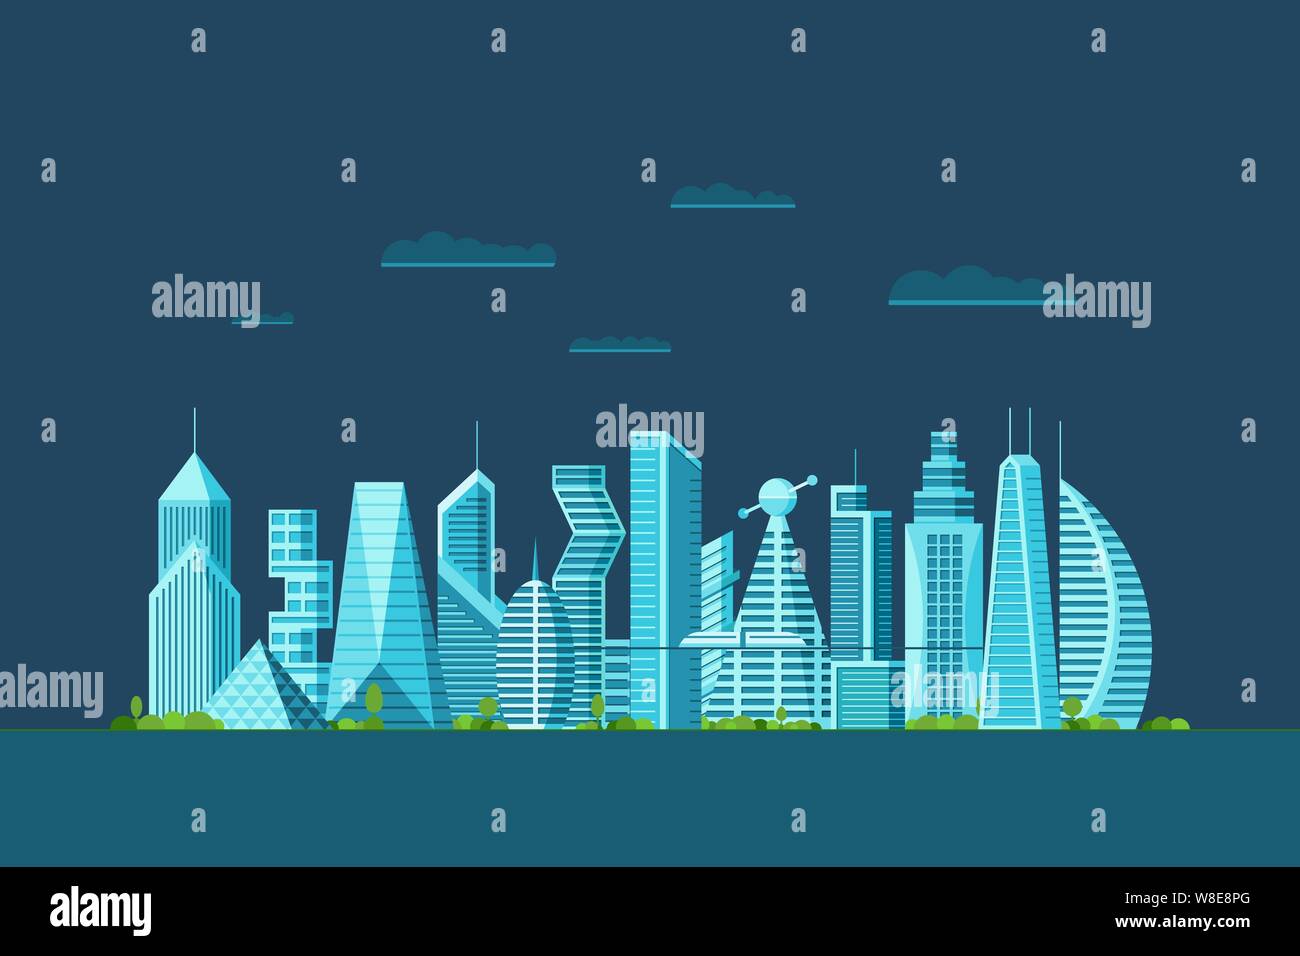 Detailed night future city with different architecture buildings skyscrapers apartments. Futuristic multi-storey cyberpunk graphic cityscape town. Vector real estate urban construction illustration Stock Vector